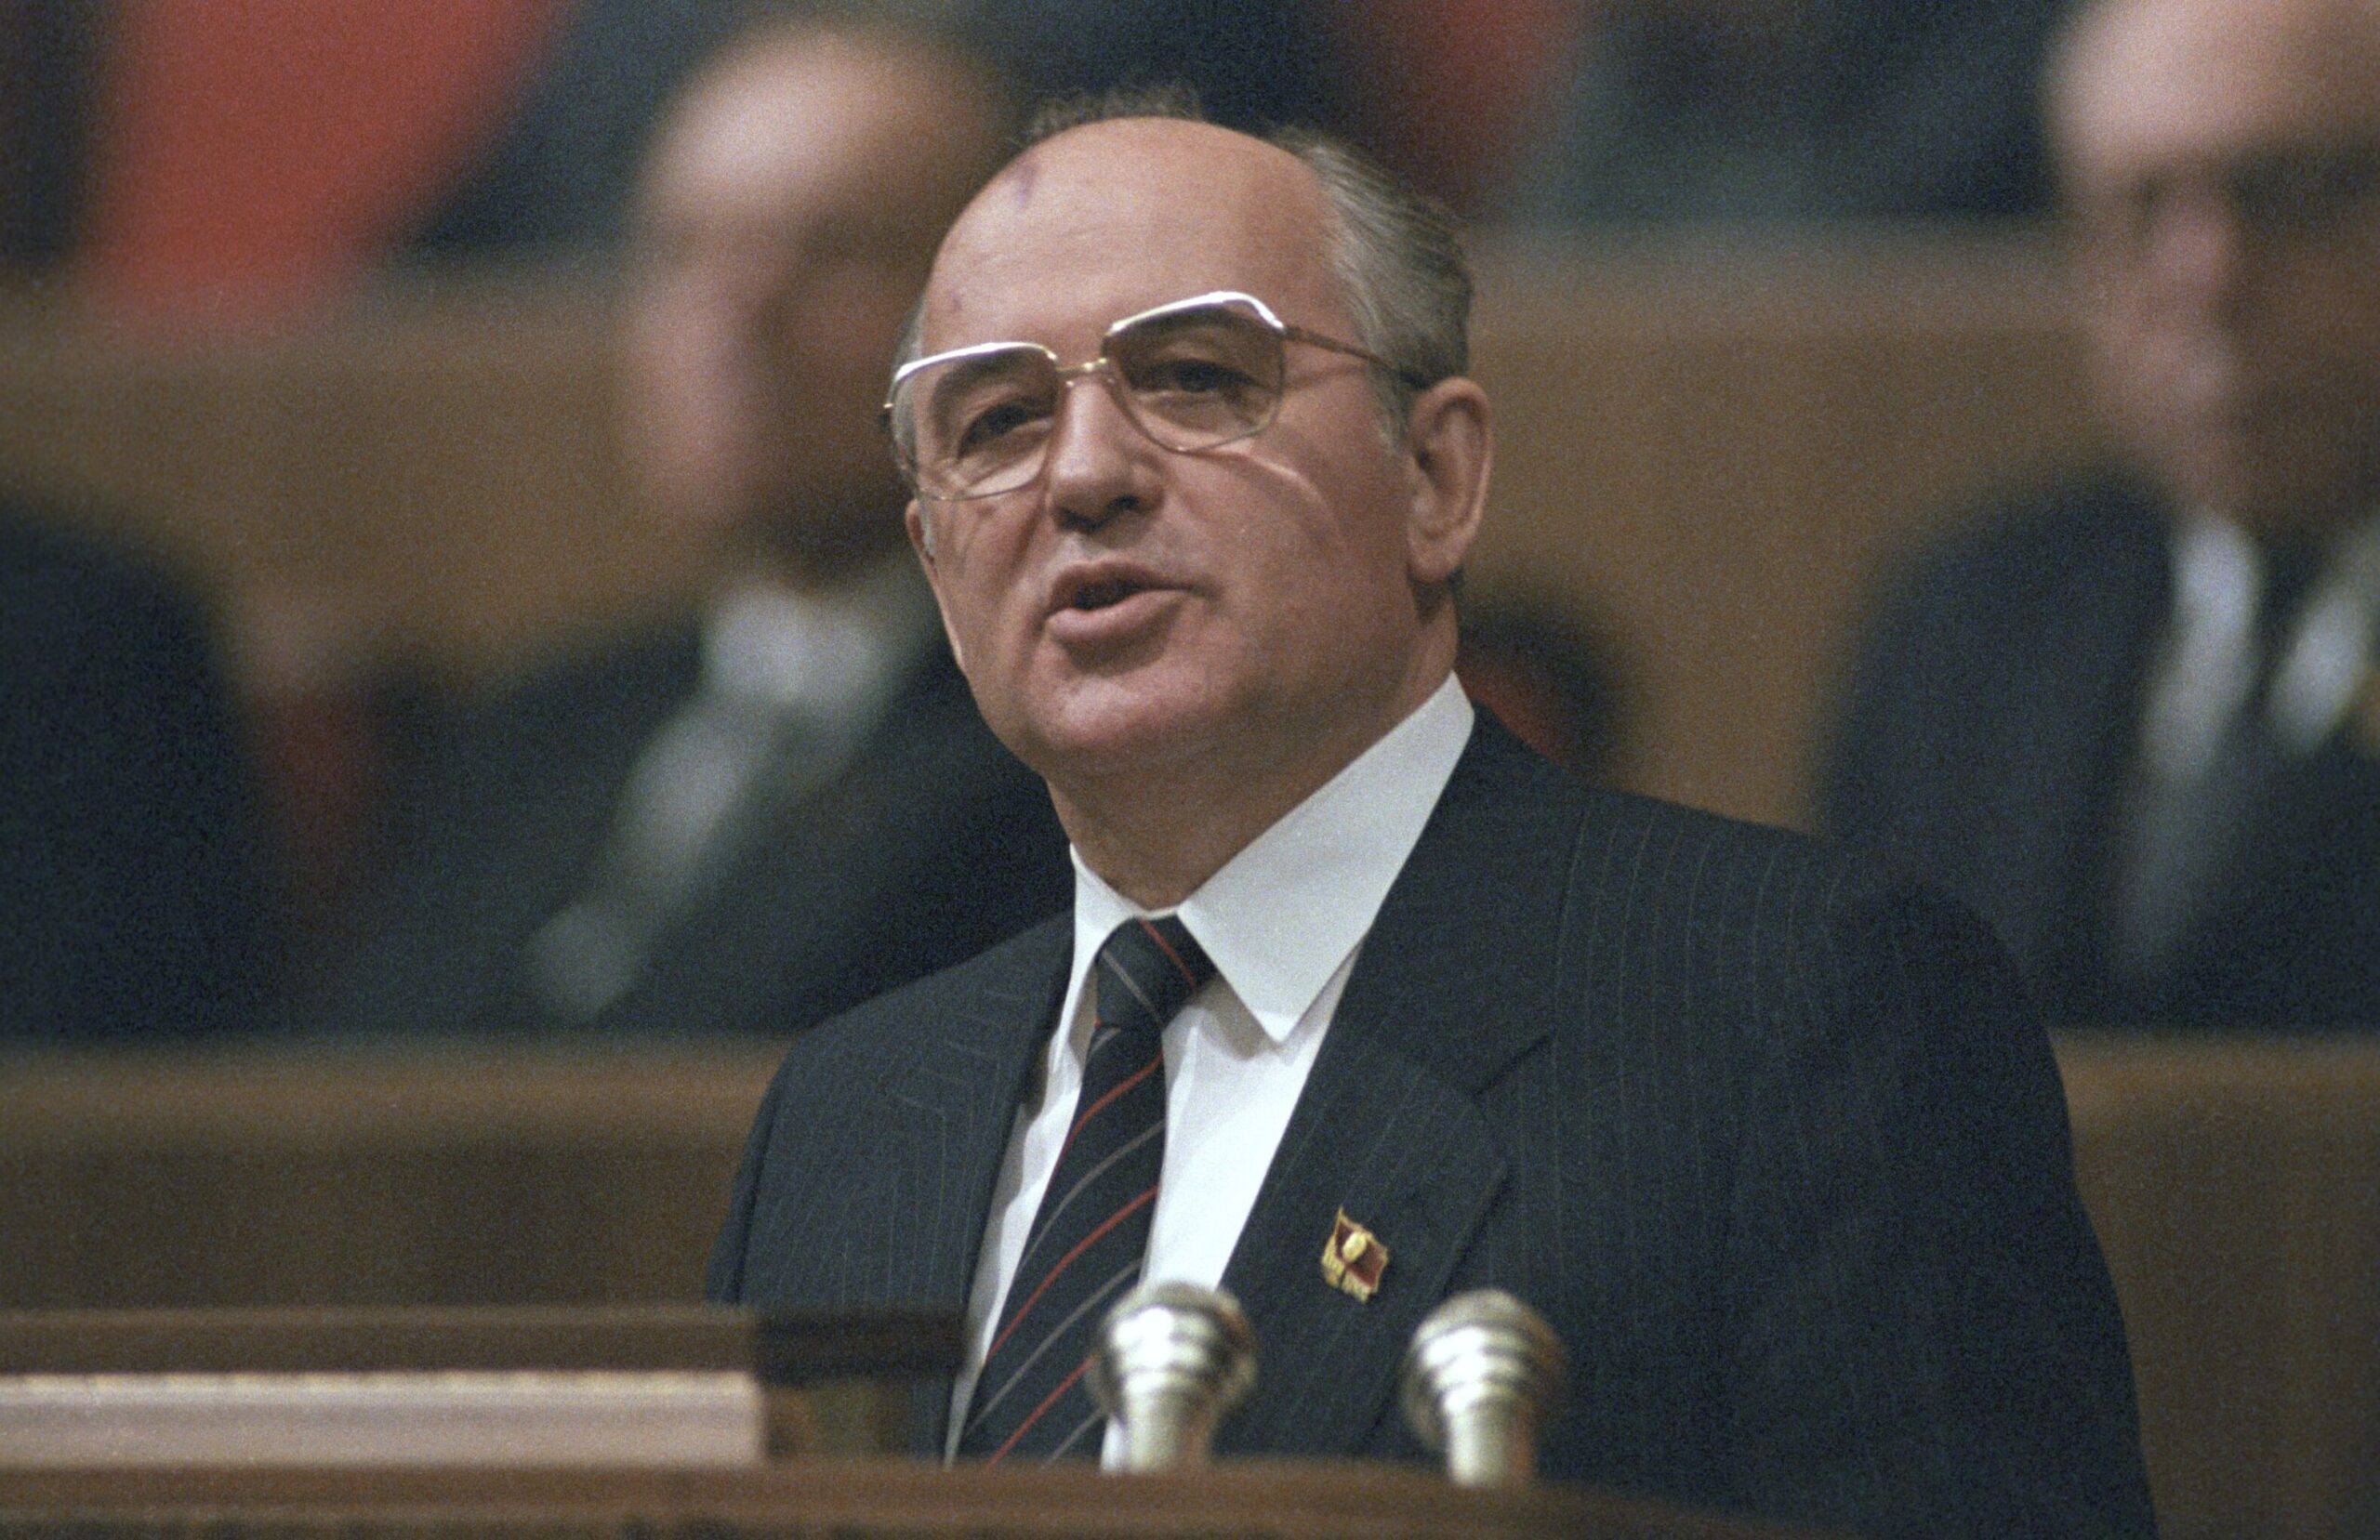 Zyuganov: “I consider it a great tragedy that Gorbachev came to the crucible of political power”